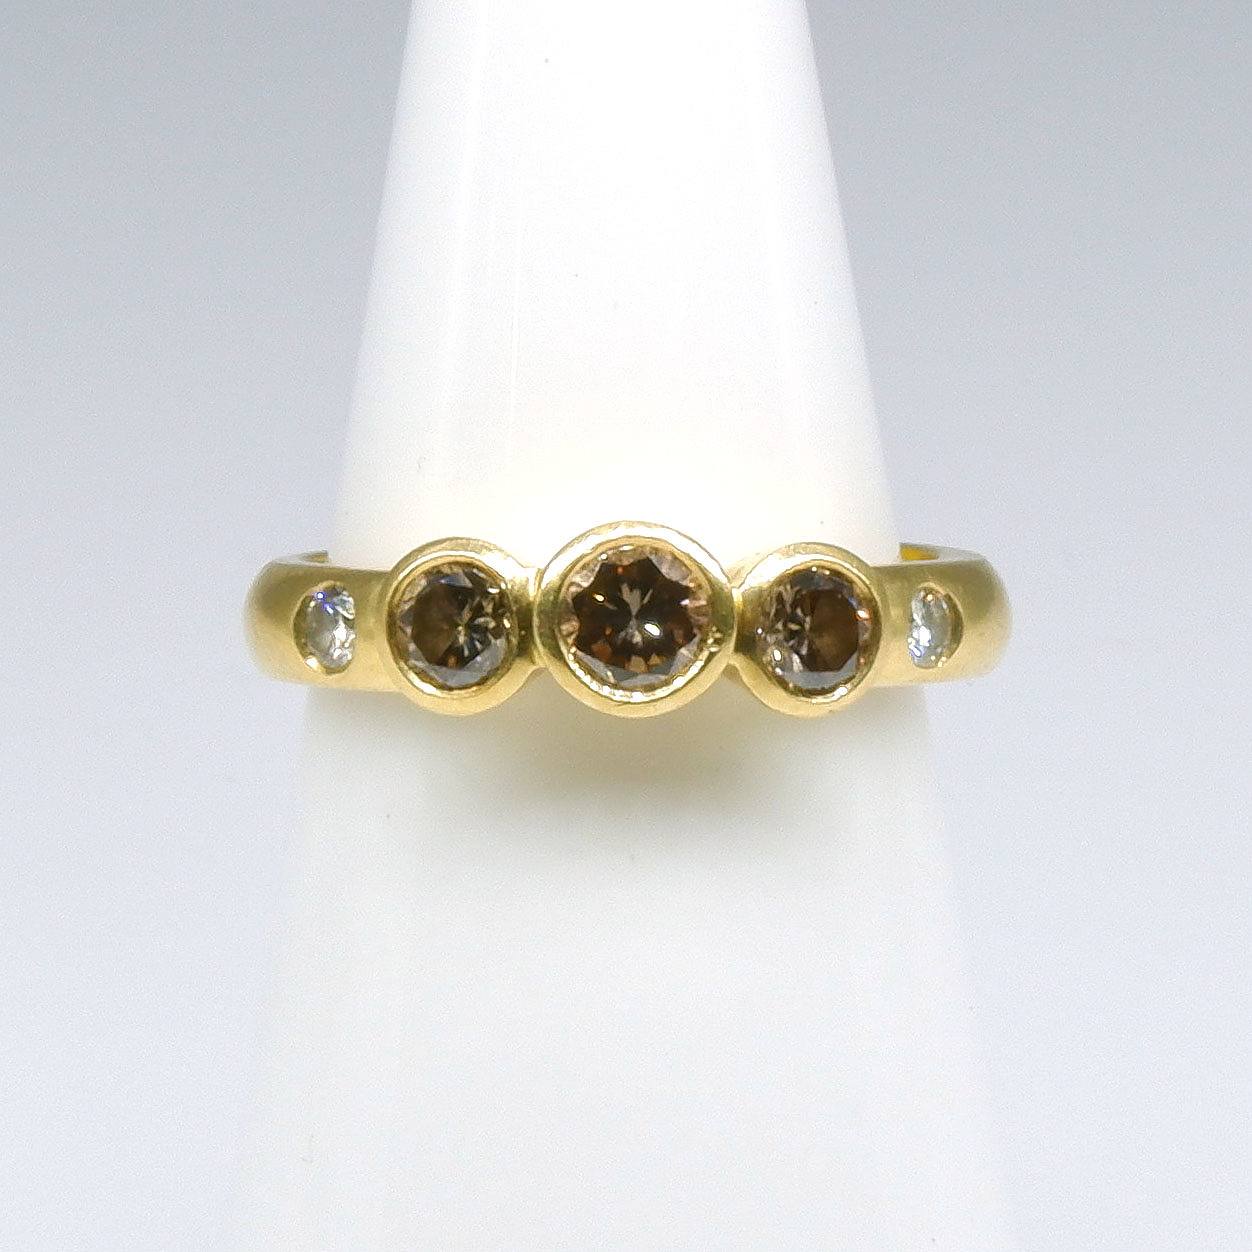 '18ct Yellow Gold Five Diamond Ring With Three Cognac Diamonds in Bezel Setting and Two White Diamonds Set into The Band'